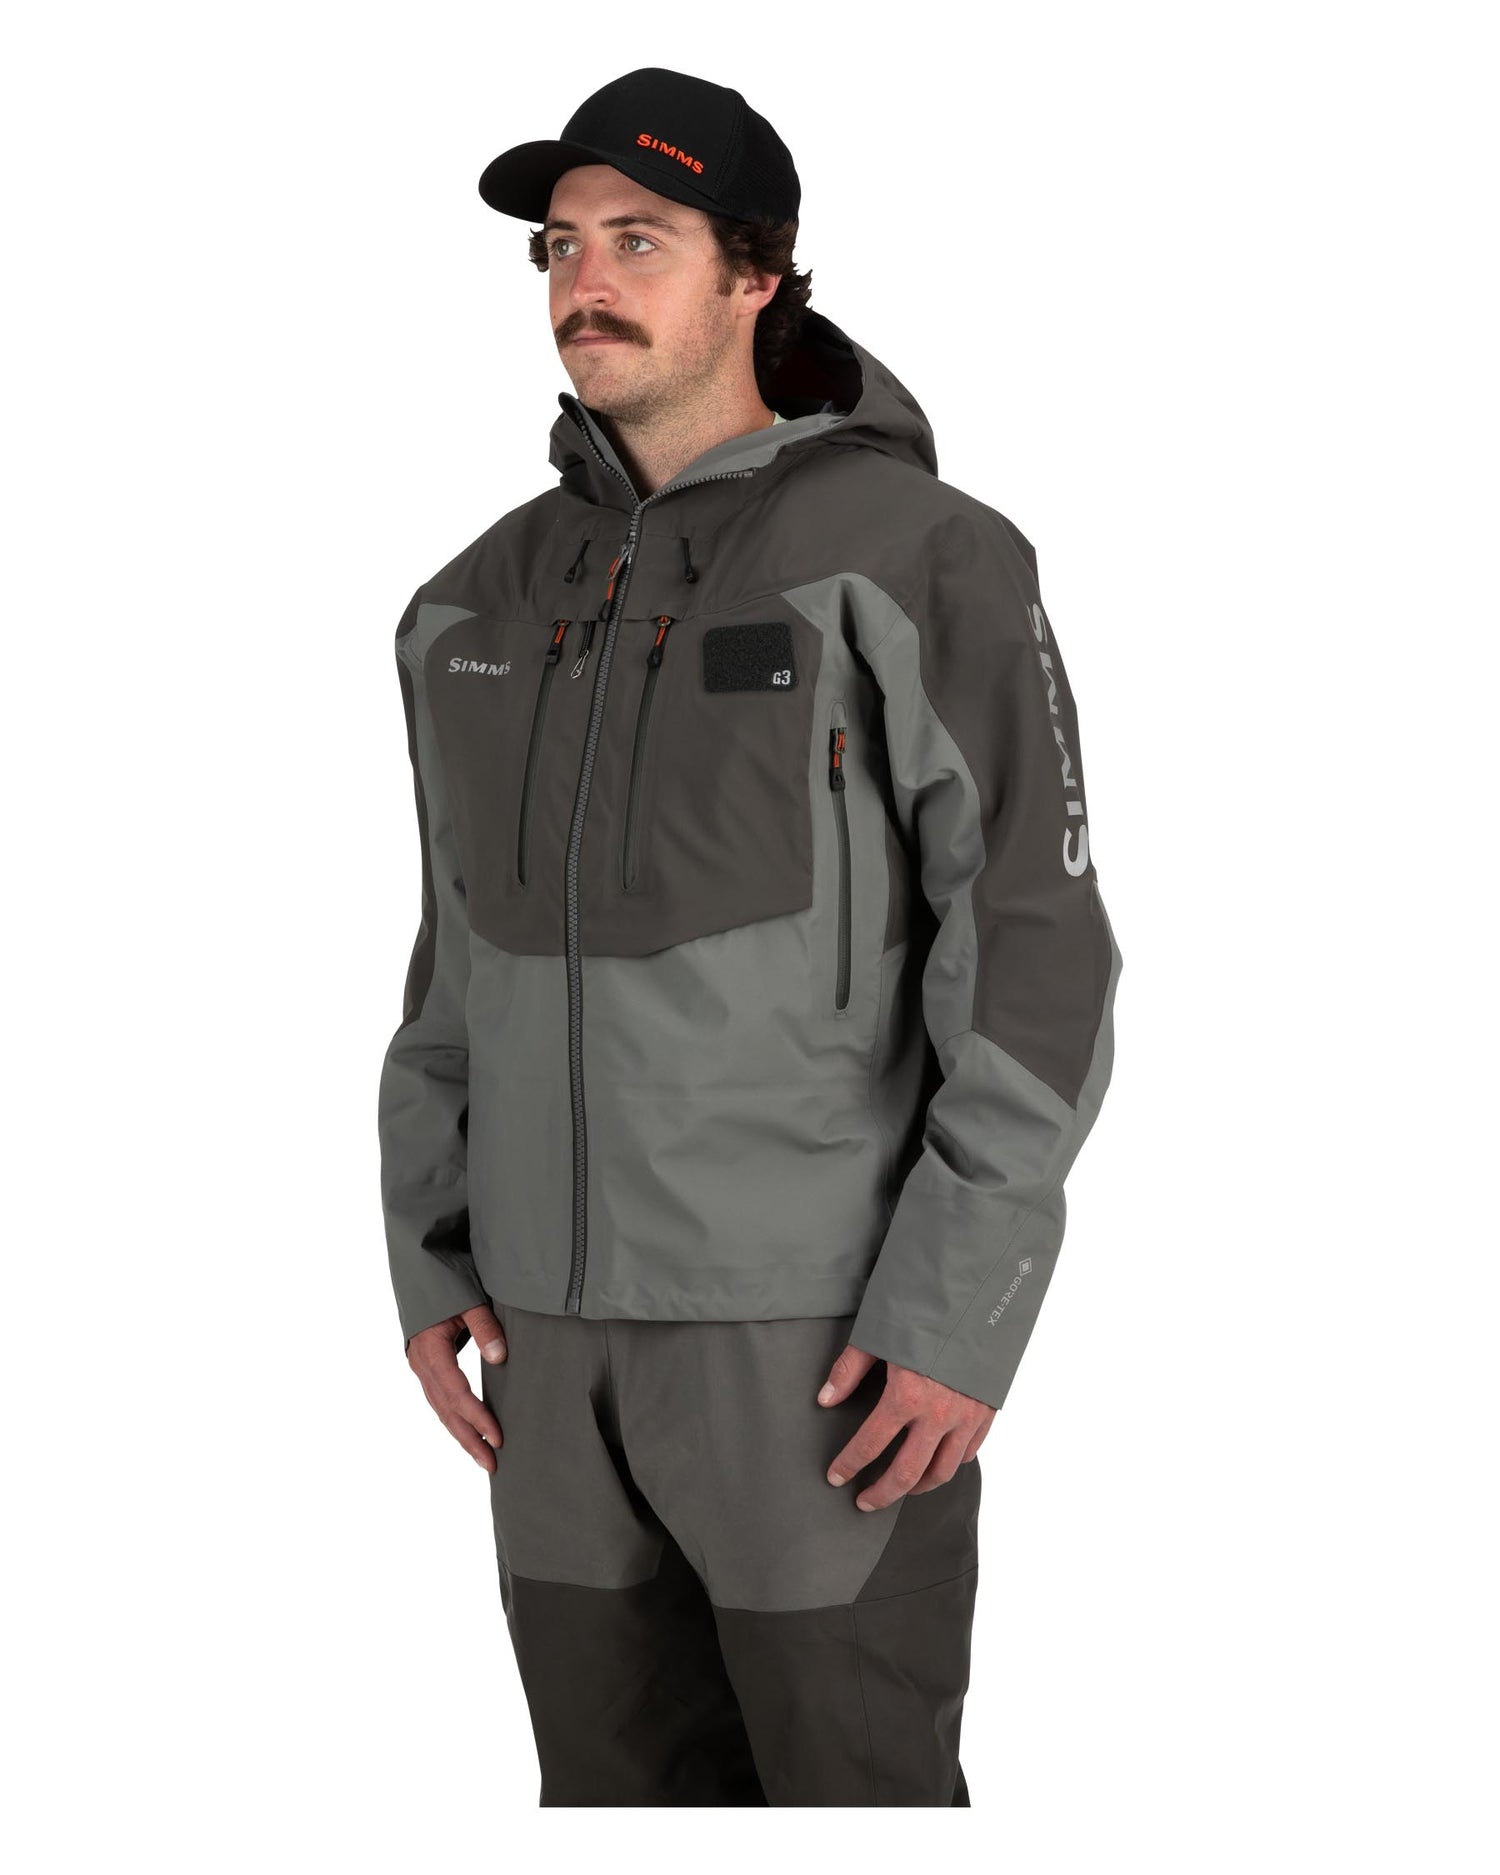 Jackets - The best breathable wading jackets from Simms